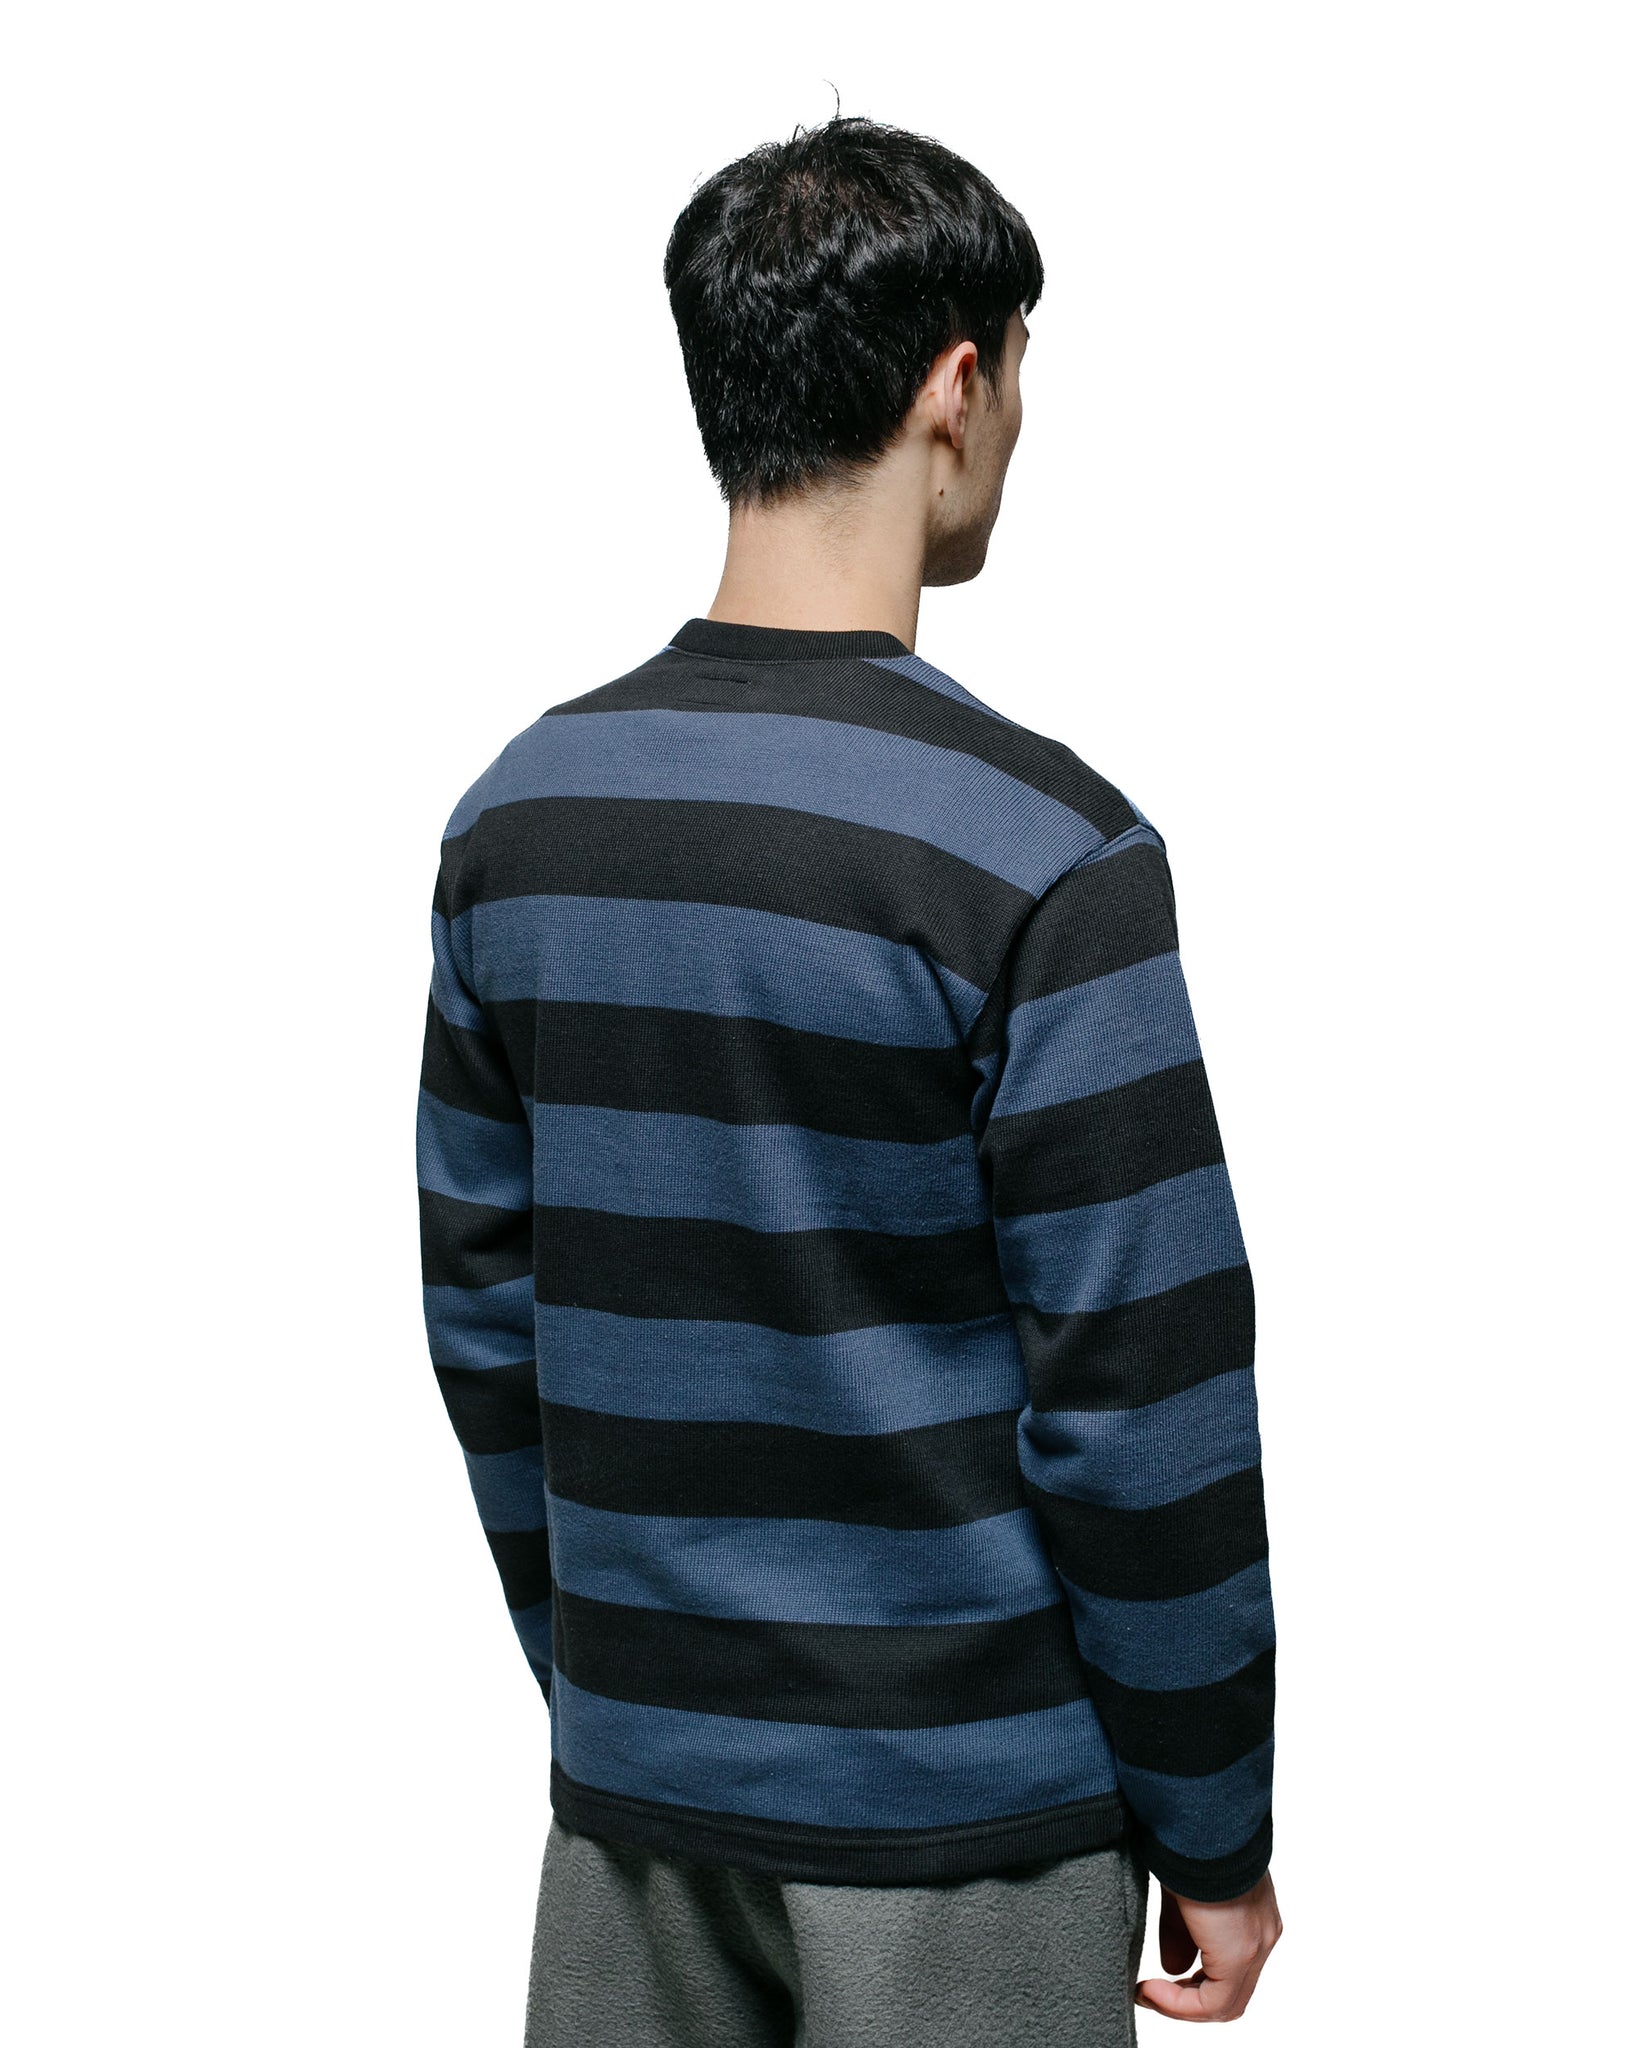 The Real McCoy's BC18104 Buco Stripe Racing Jersey BlackBlue model back